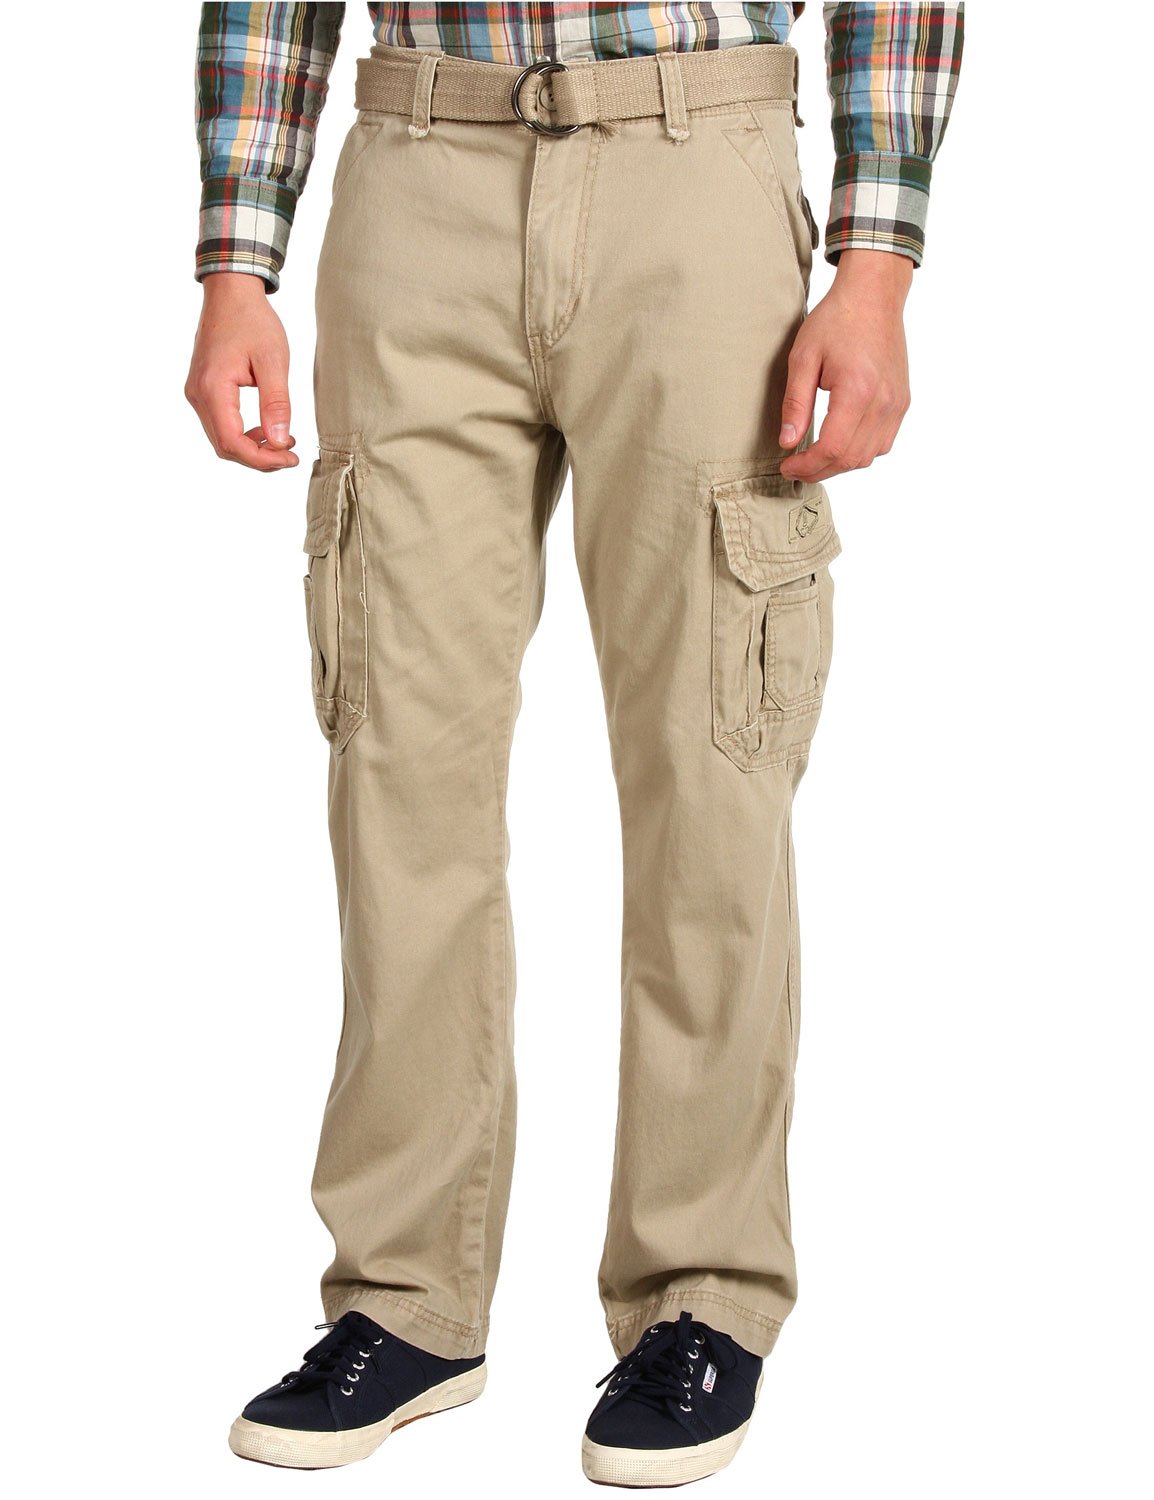 UnionBay Cargo Pants with Belt Quality Made Sportswear Utility Pant Color  Desert | eBay